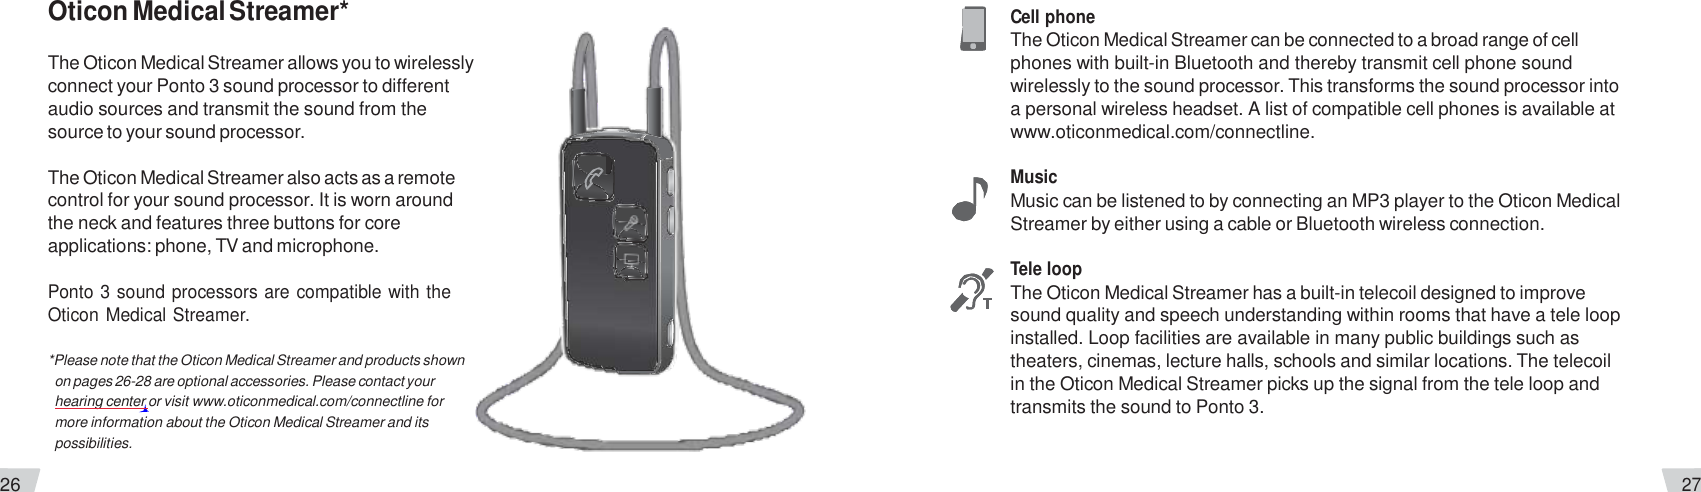 26 27  Oticon Medical Streamer*  The Oticon Medical Streamer allows you to wirelessly connect your Ponto 3 sound processor to different audio sources and transmit the sound from the source to your sound processor.  The Oticon Medical Streamer also acts as a remote control for your sound processor. It is worn around the neck and features three buttons for core applications: phone, TV and microphone.  Ponto 3 sound processors are compatible with the Oticon Medical Streamer.  *Please note that the Oticon Medical Streamer and products shown on pages 26-28 are optional accessories. Please contact your hearing center or visit www.oticonmedical.com/connectline for more information about the Oticon Medical Streamer and its possibilities.  Cell phone The Oticon Medical Streamer can be connected to a broad range of cell phones with built-in Bluetooth and thereby transmit cell phone sound wirelessly to the sound processor. This transforms the sound processor into a personal wireless headset. A list of compatible cell phones is available at www.oticonmedical.com/connectline.  Music Music can be listened to by connecting an MP3 player to the Oticon Medical Streamer by either using a cable or Bluetooth wireless connection.  Tele loop The Oticon Medical Streamer has a built-in telecoil designed to improve sound quality and speech understanding within rooms that have a tele loop installed. Loop facilities are available in many public buildings such as theaters, cinemas, lecture halls, schools and similar locations. The telecoil in the Oticon Medical Streamer picks up the signal from the tele loop and transmits the sound to Ponto 3. 